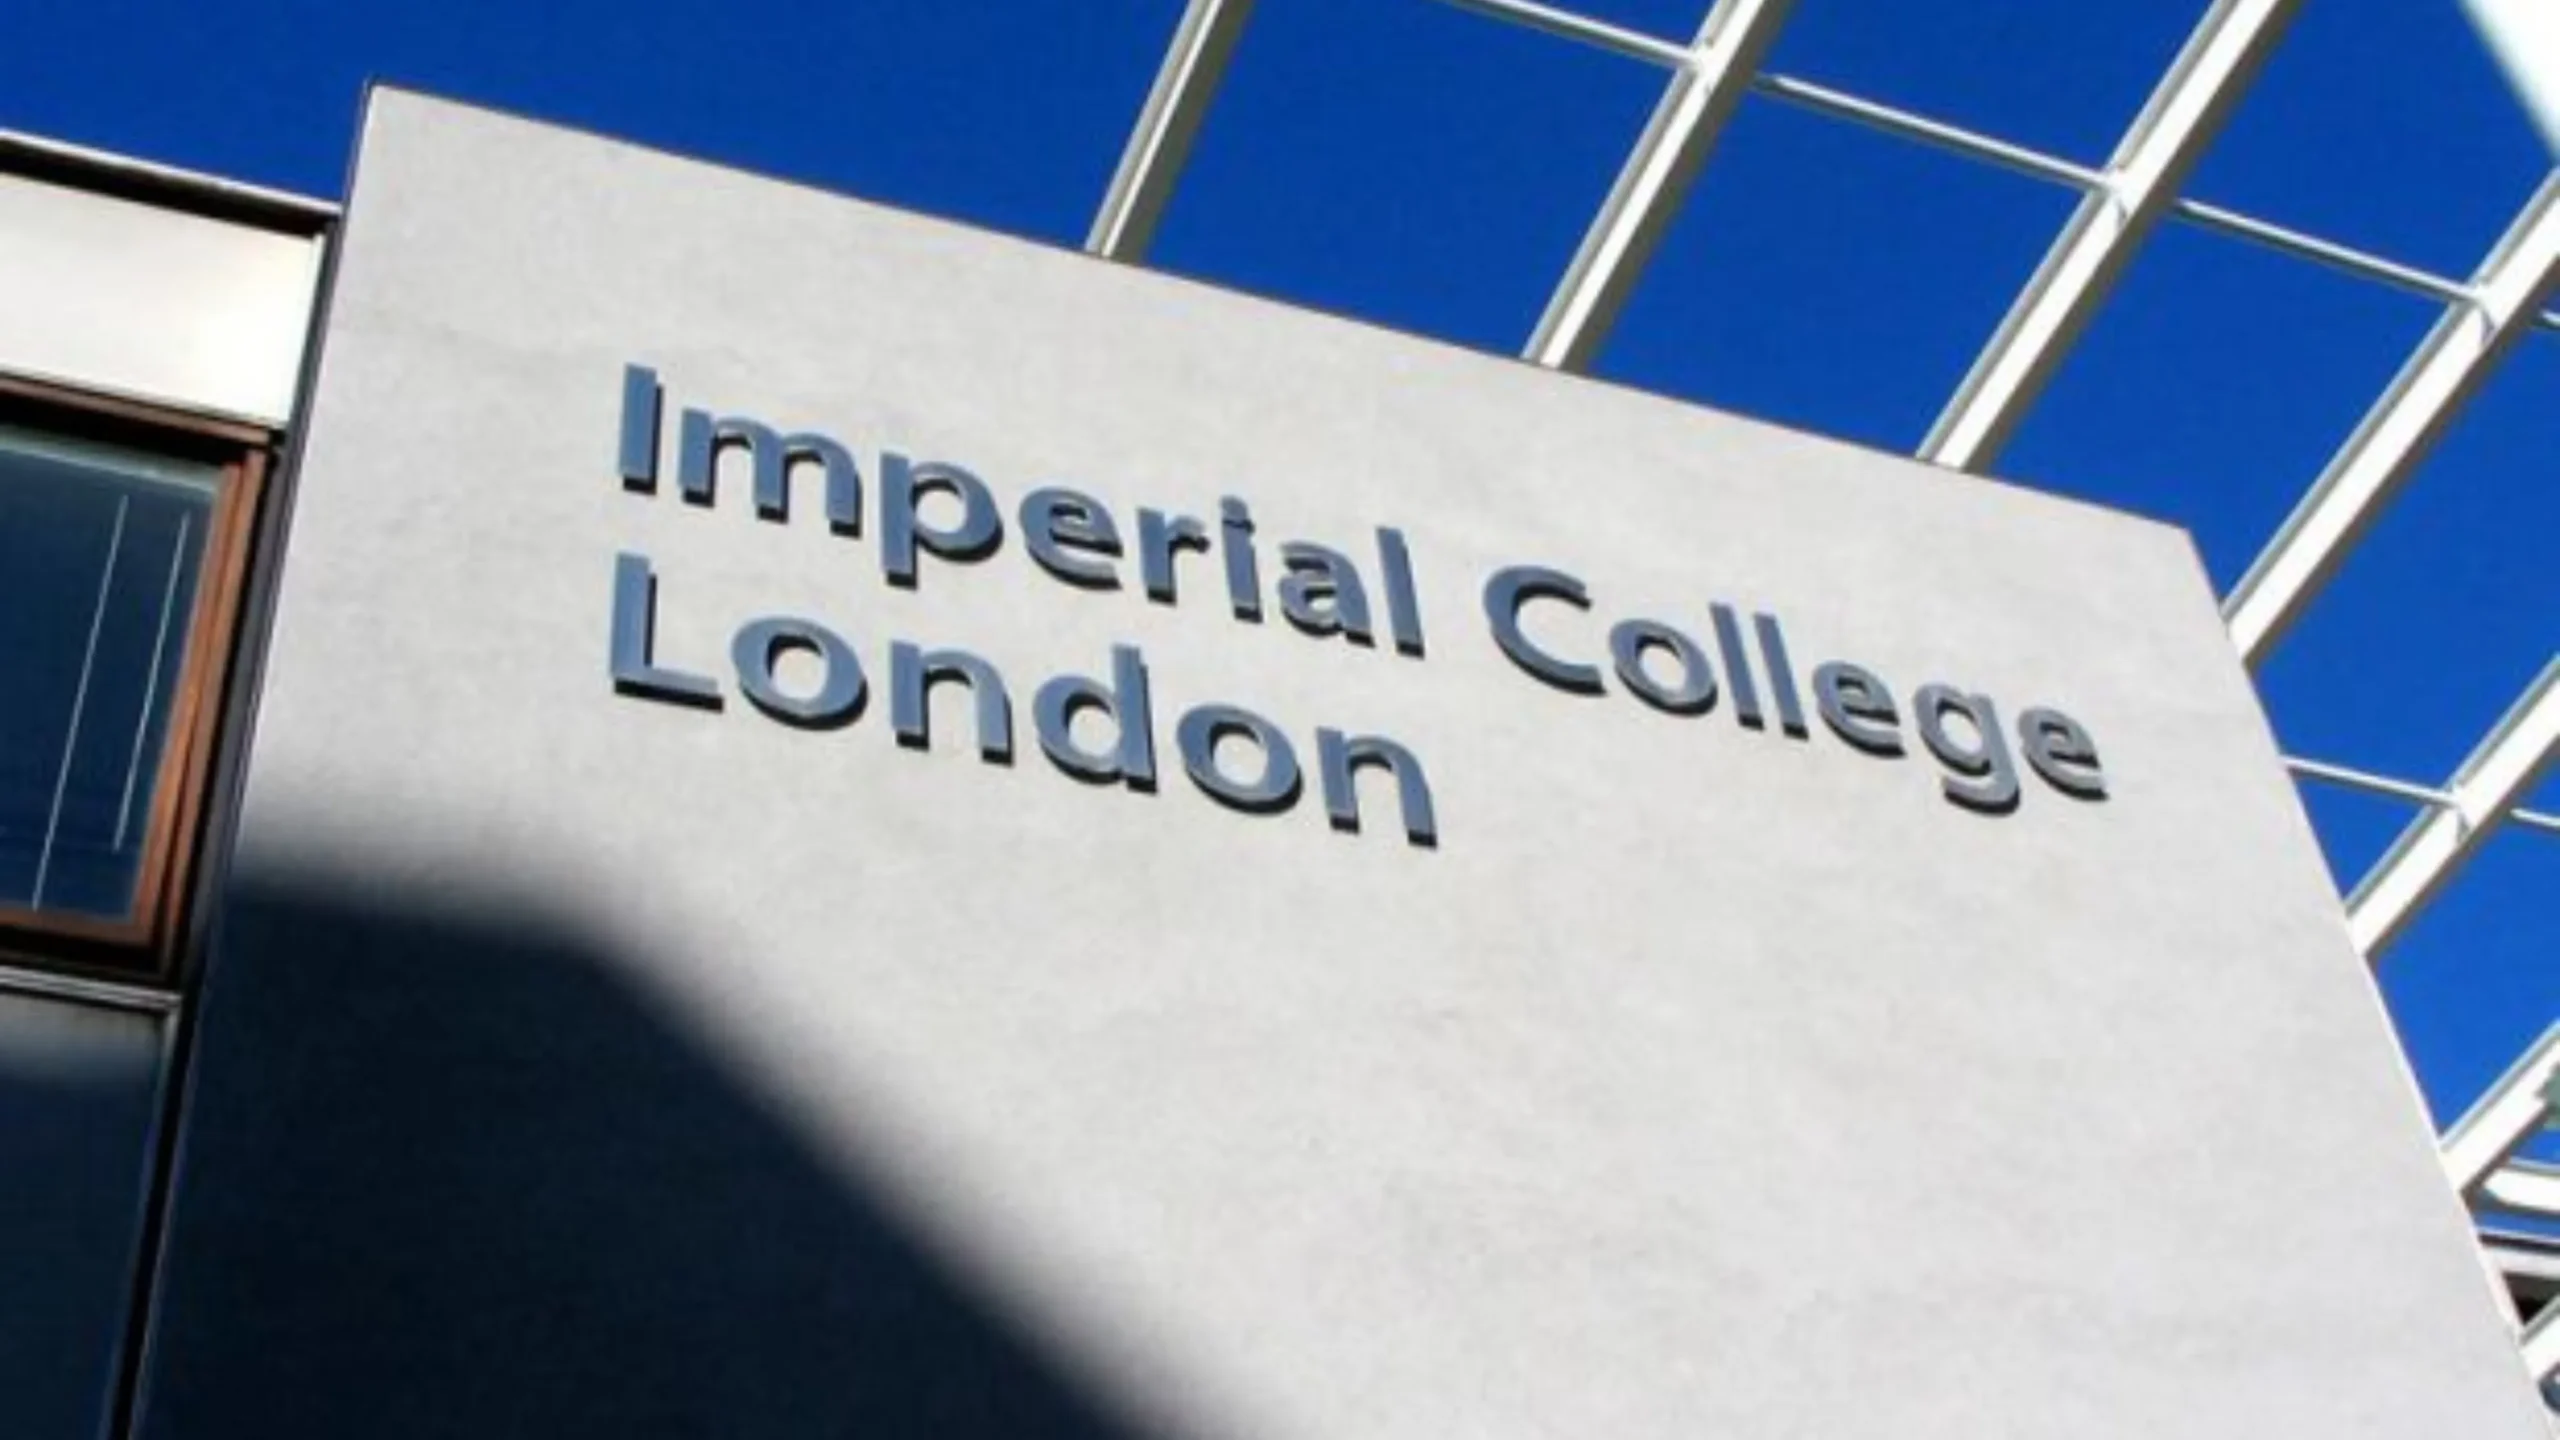 Imperial College London: Revealing Distinction in Research and Education